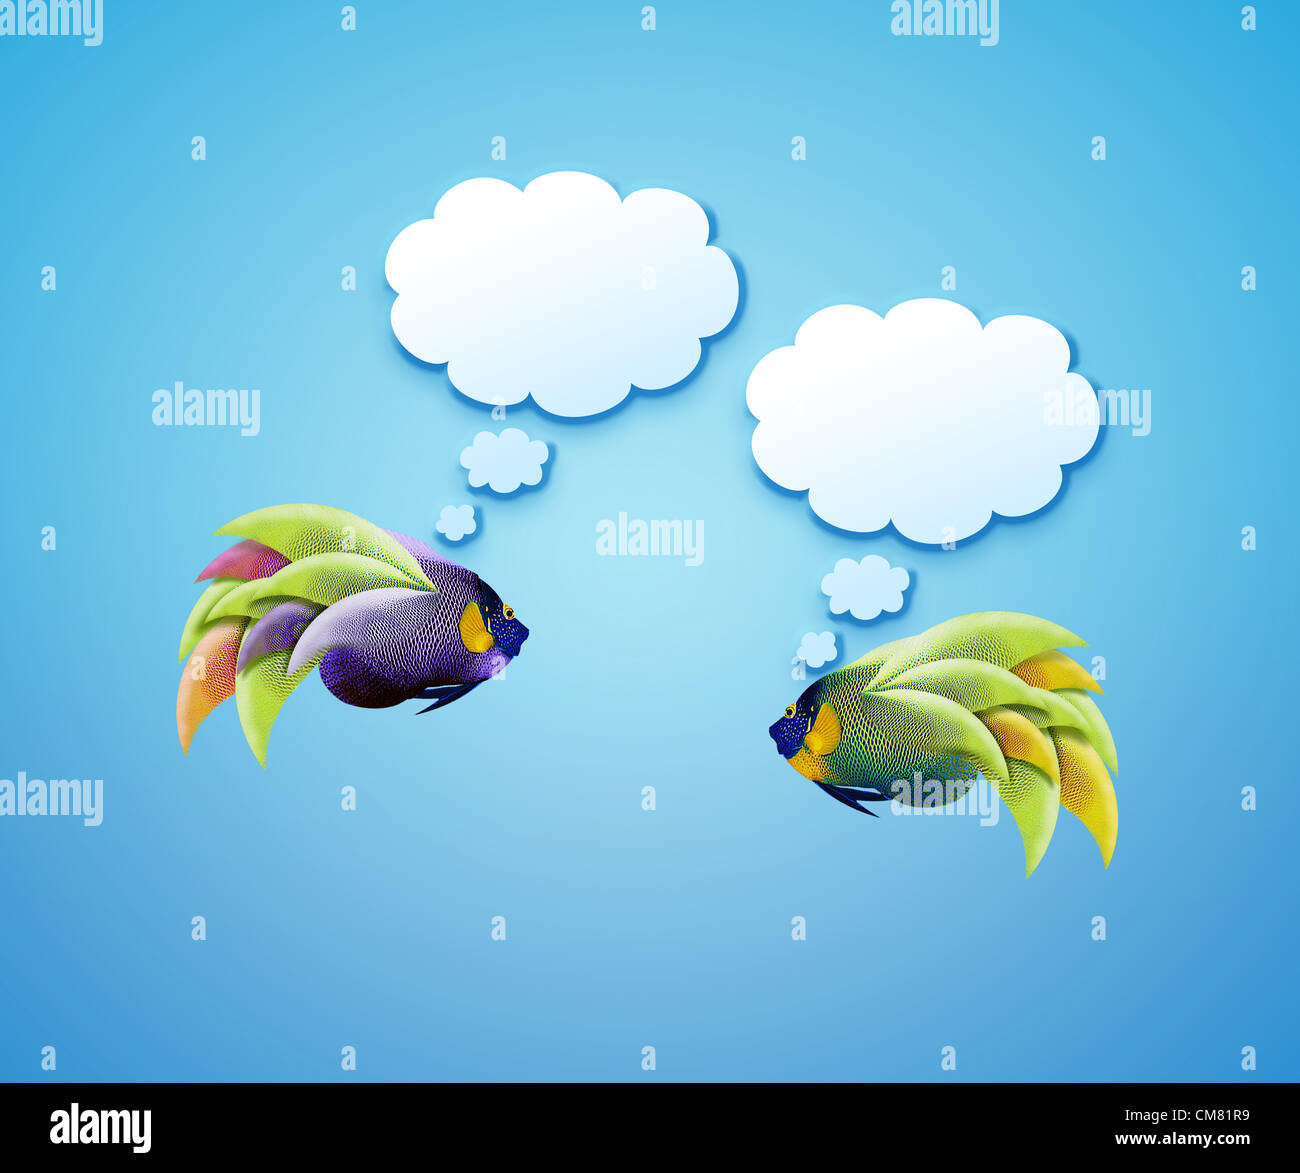 angelfish faces as social network with speech bubbles. Stock Photo